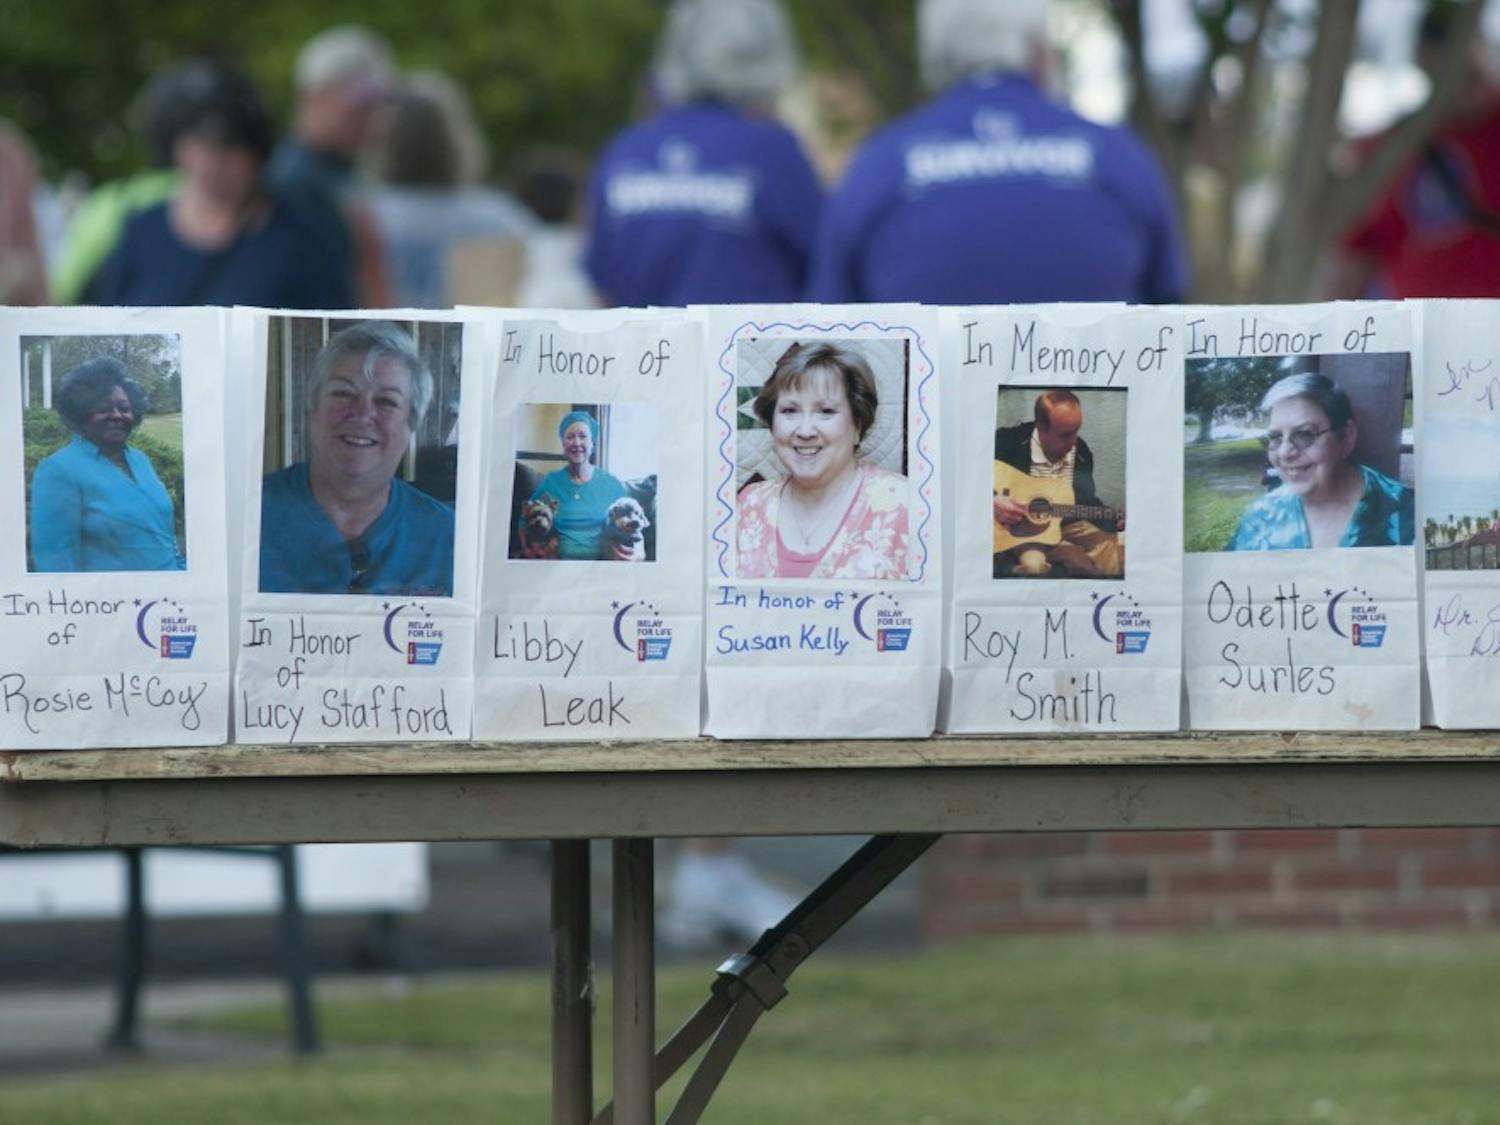 Commemorable memorials for those who have died of cancer at the Opelika Ala. Relay for Life 2016 in downtown Opelika's Courthouse Square on Friday, Apr., 22.